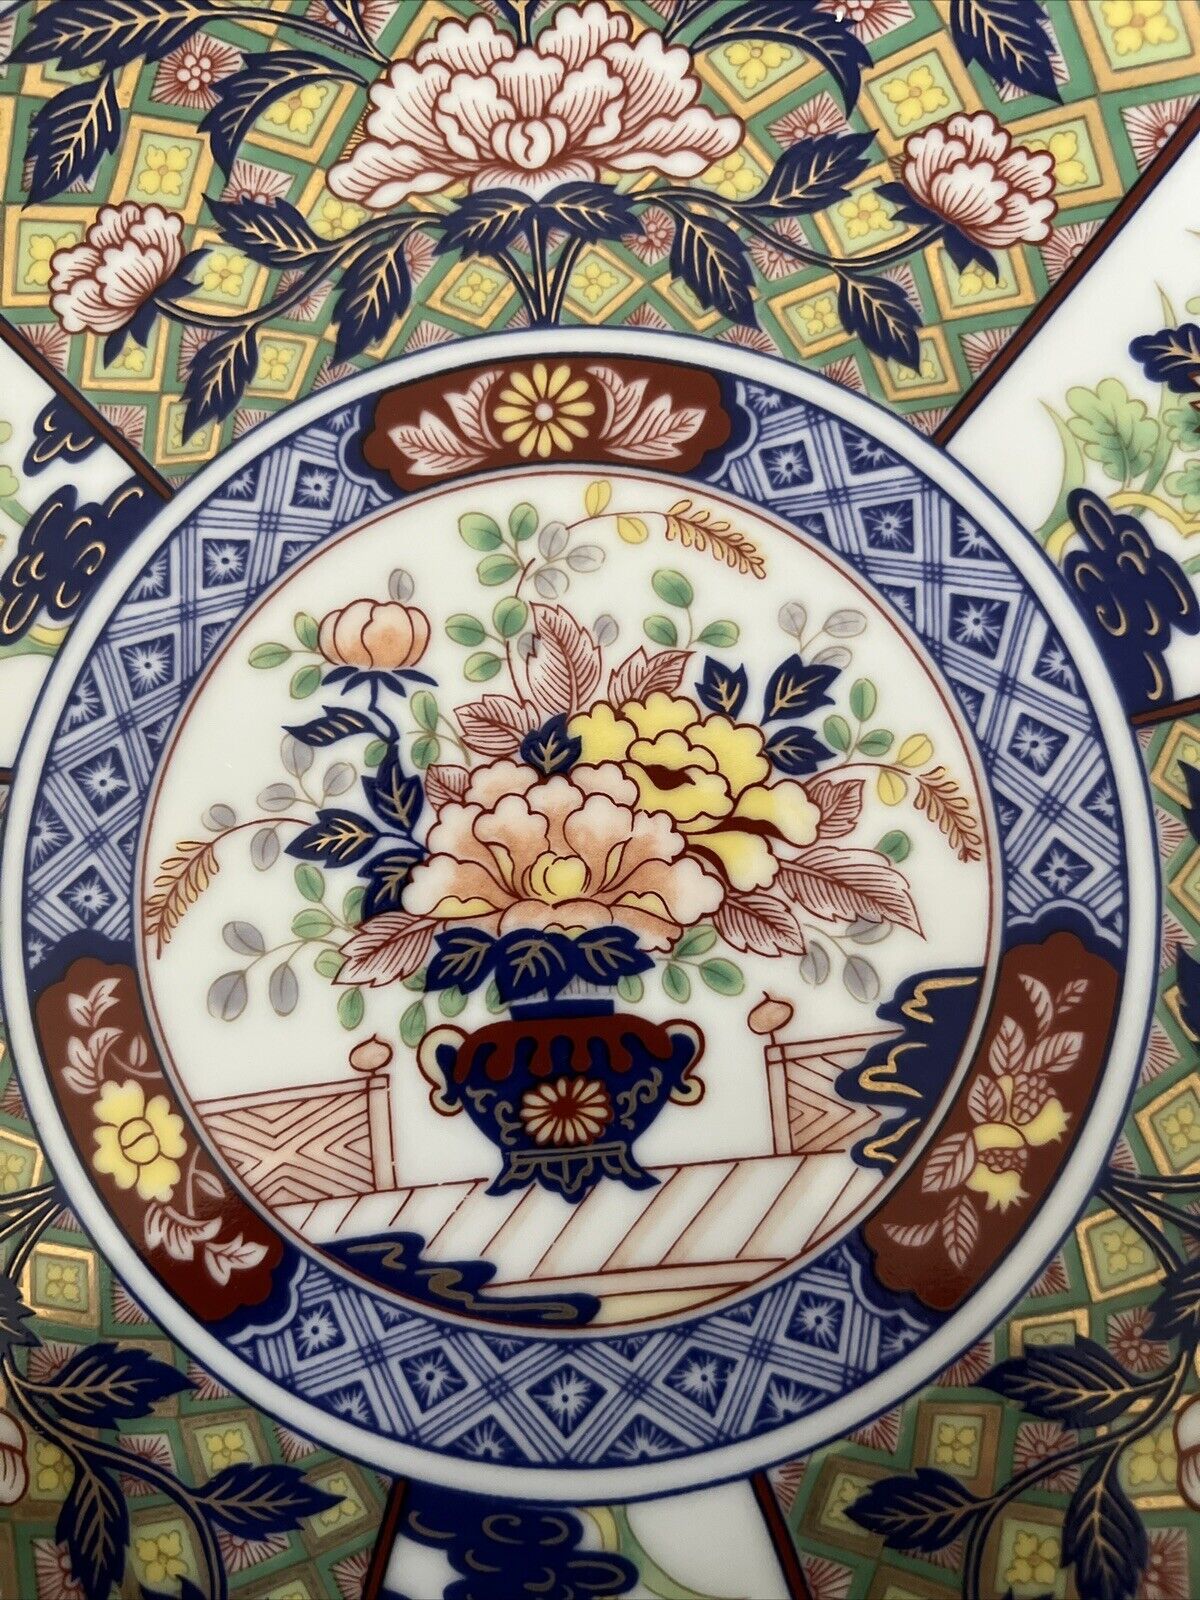 10” Imari Dynasty Decorative Plate With Floral Pattern New